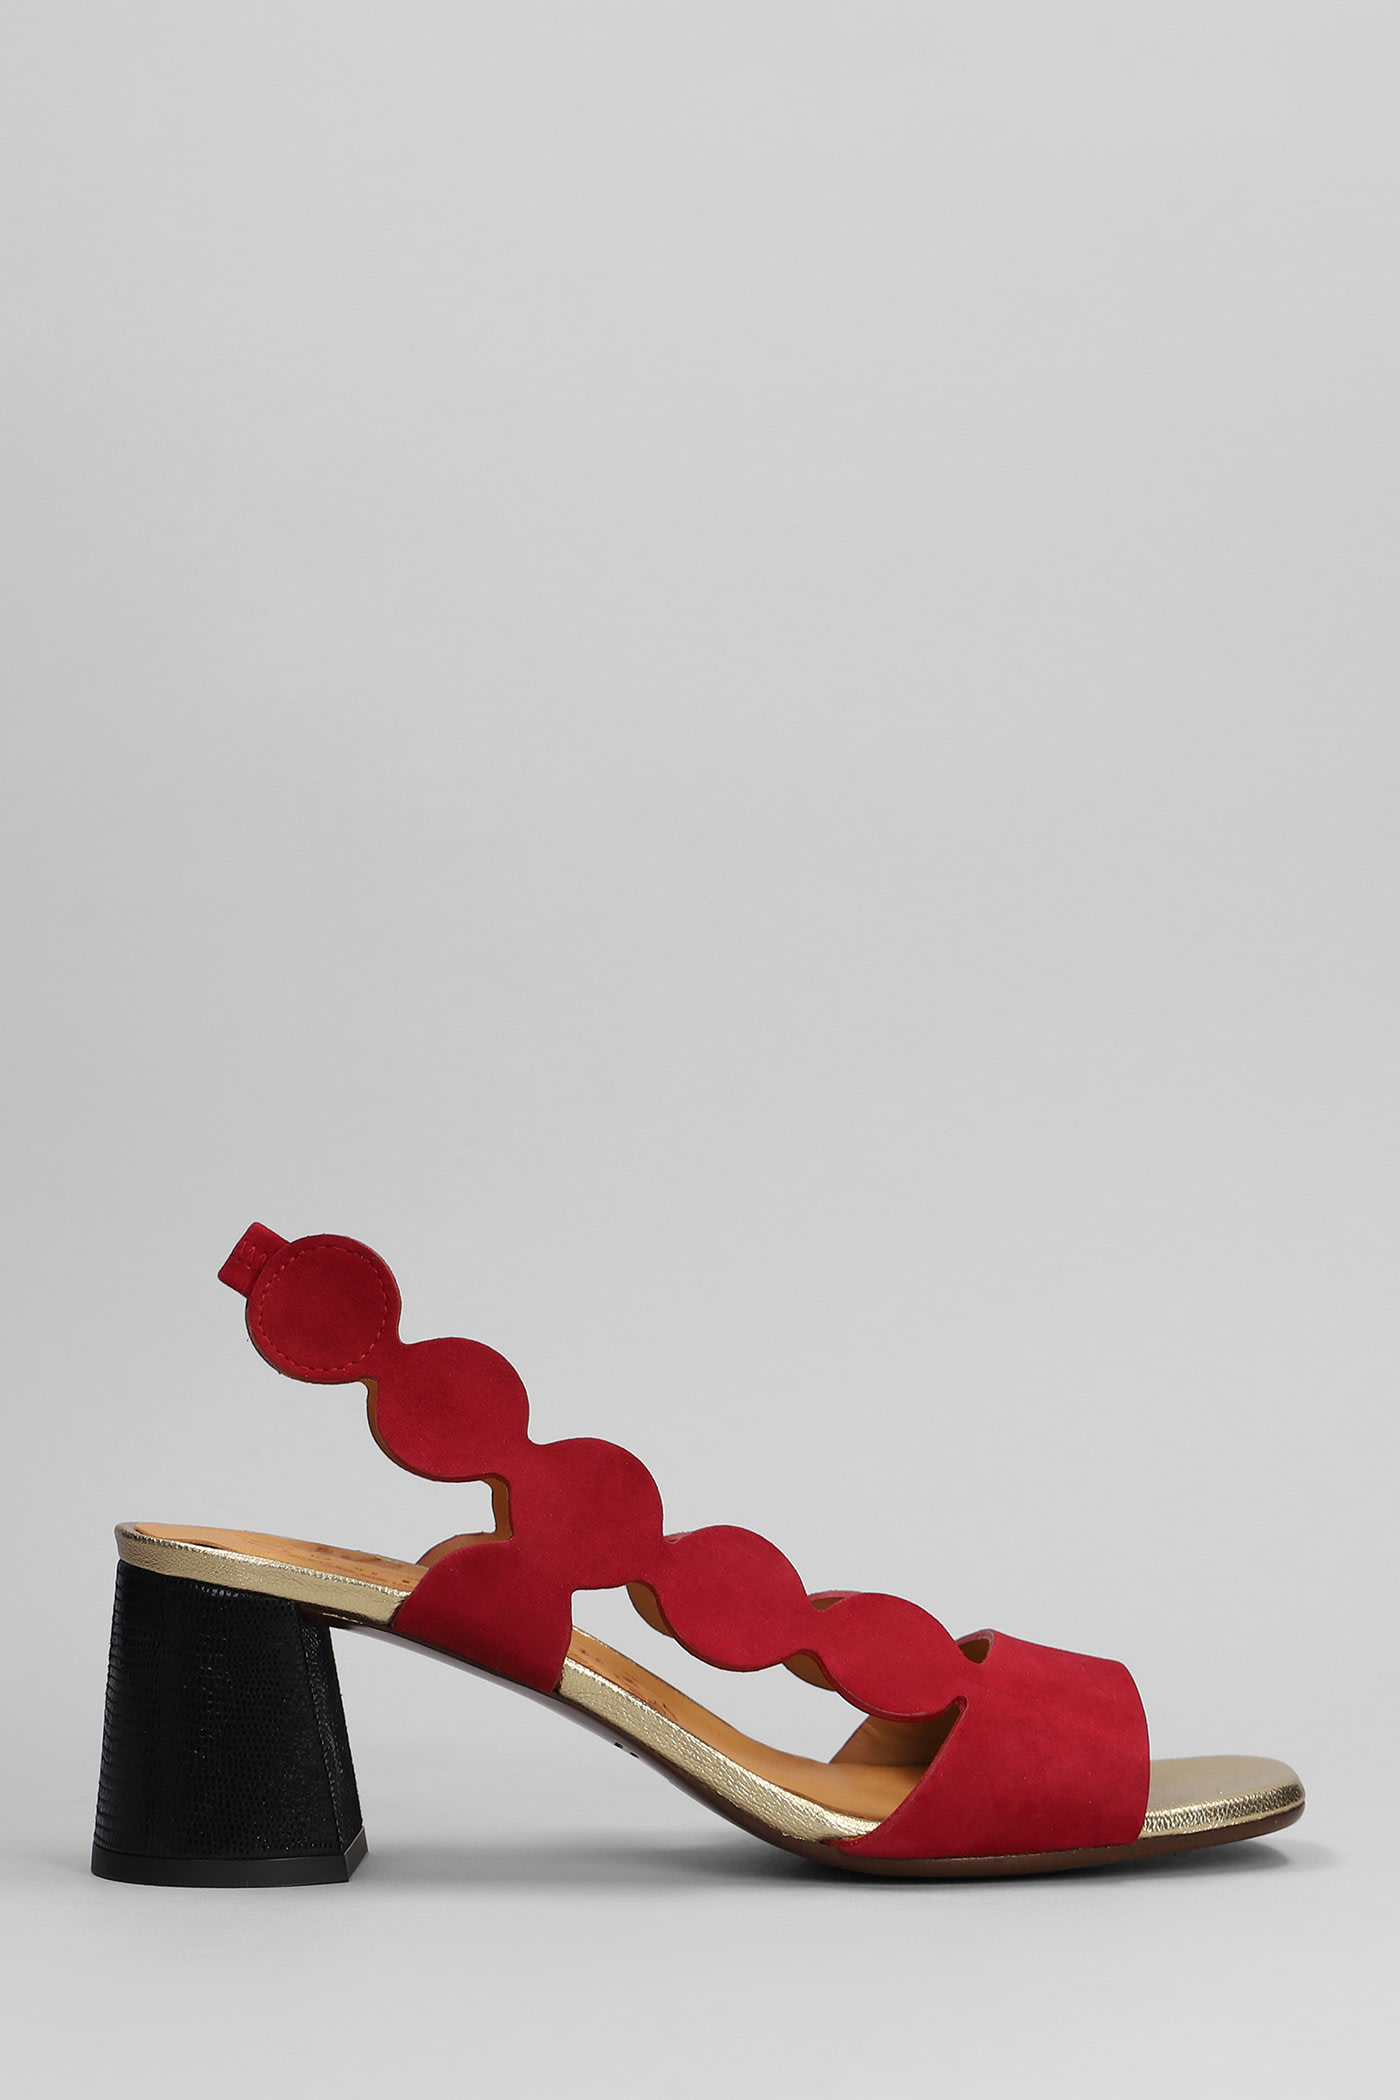 Roka Sandals In Red Suede